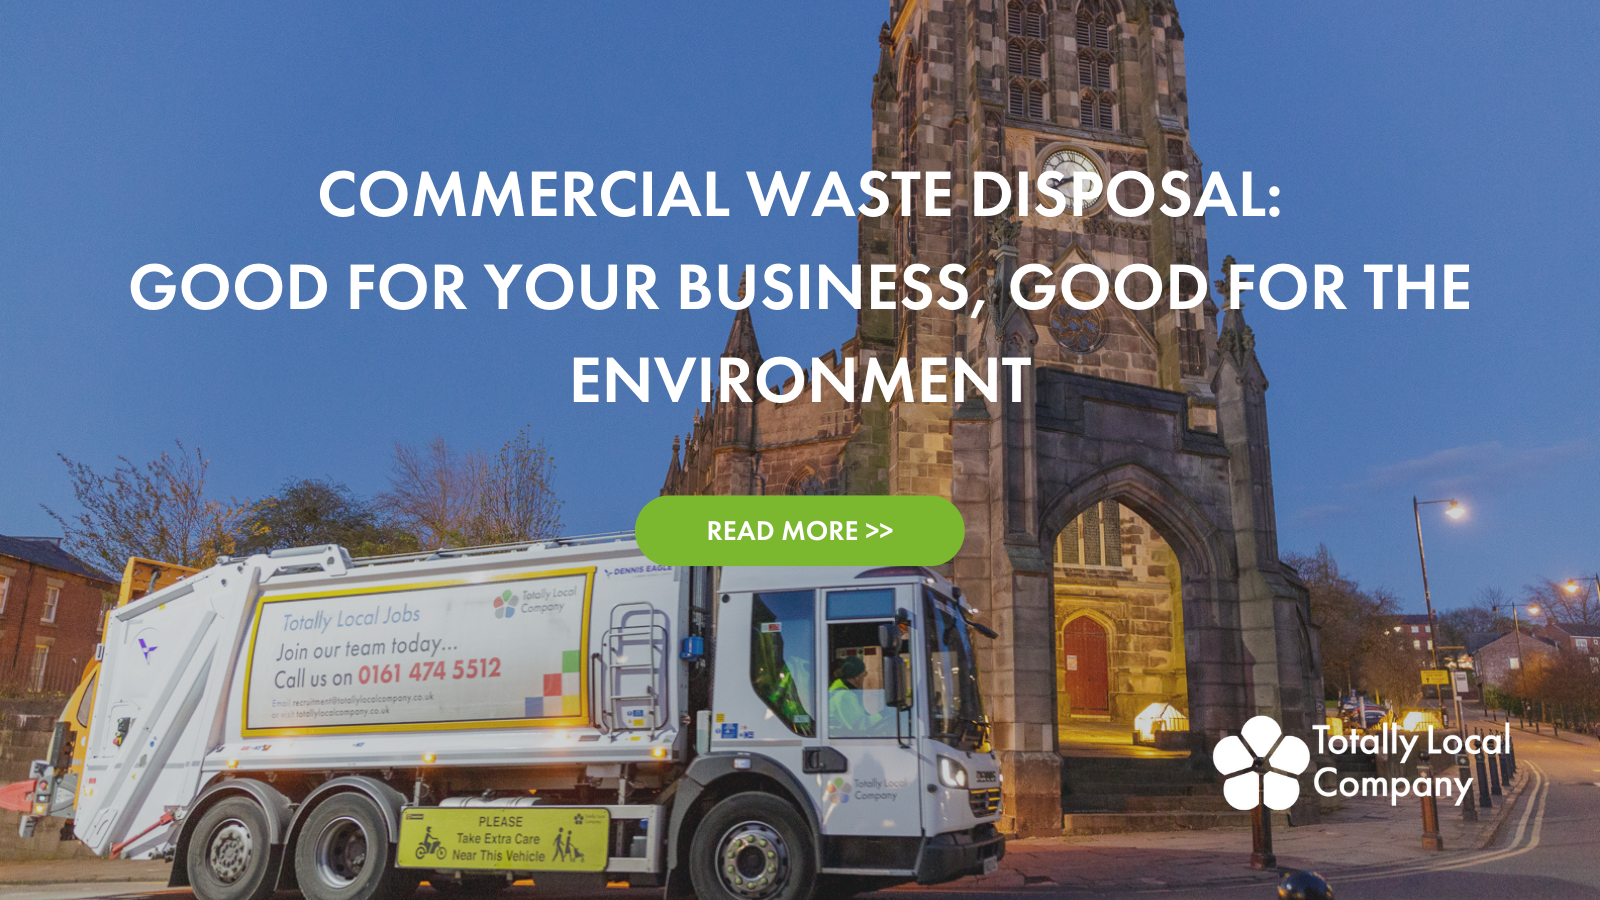 Commercial Waste Disposal: Good for your business, good for the environment